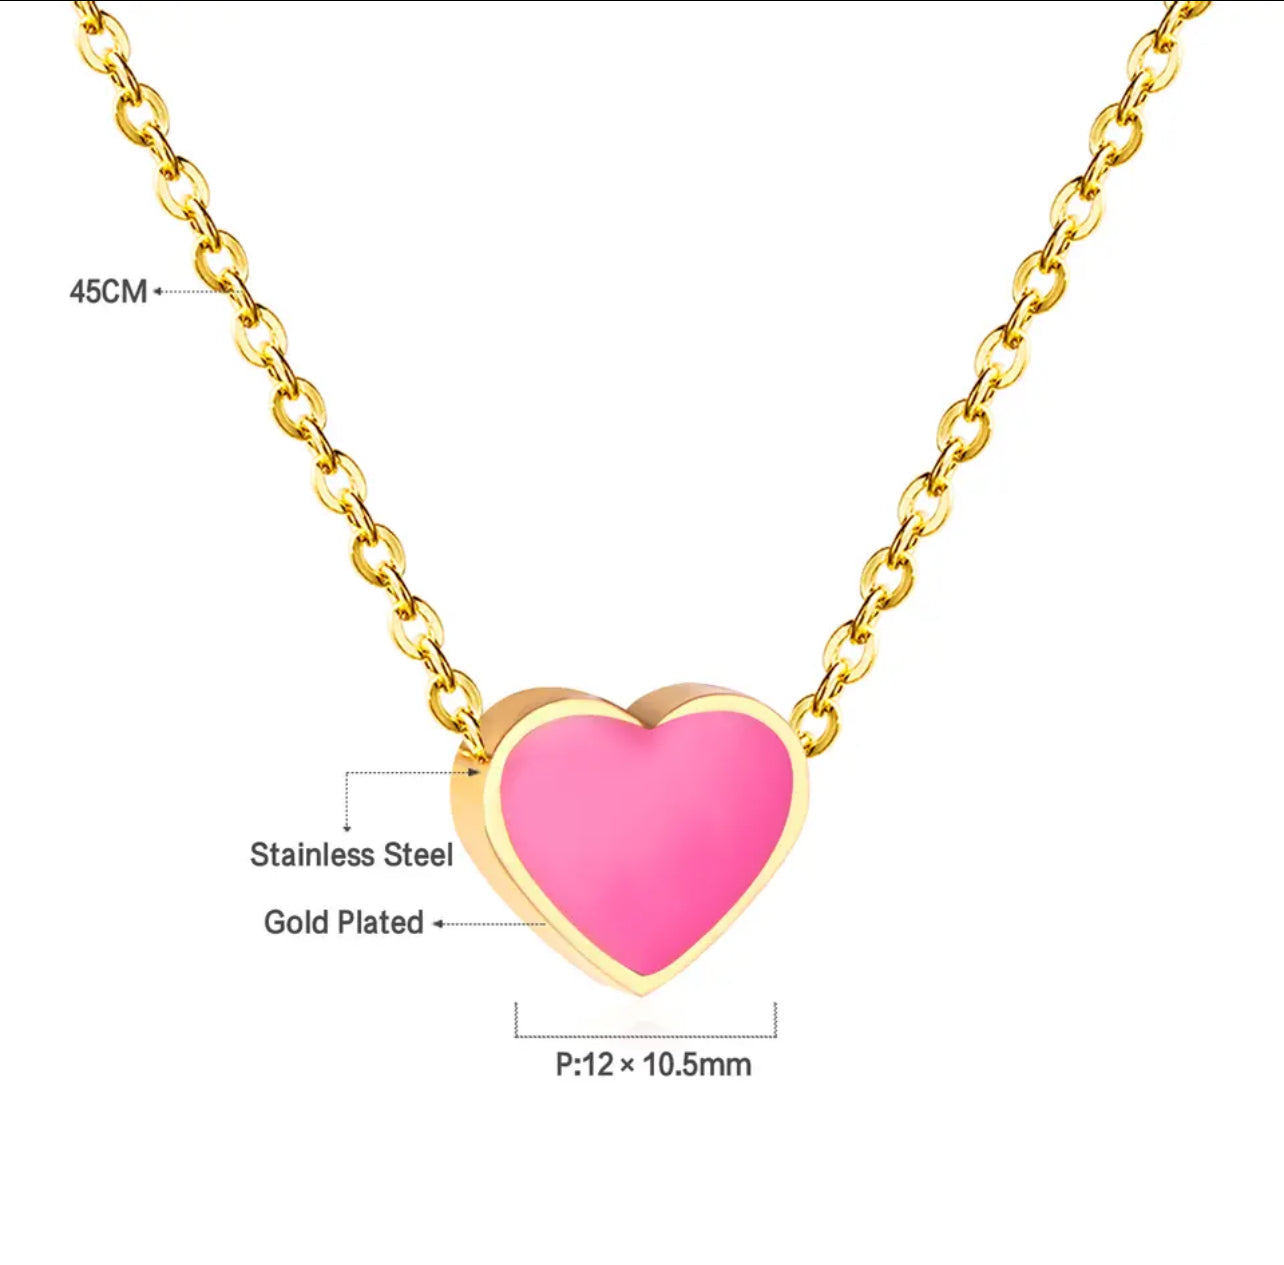 Heart Charm Necklace